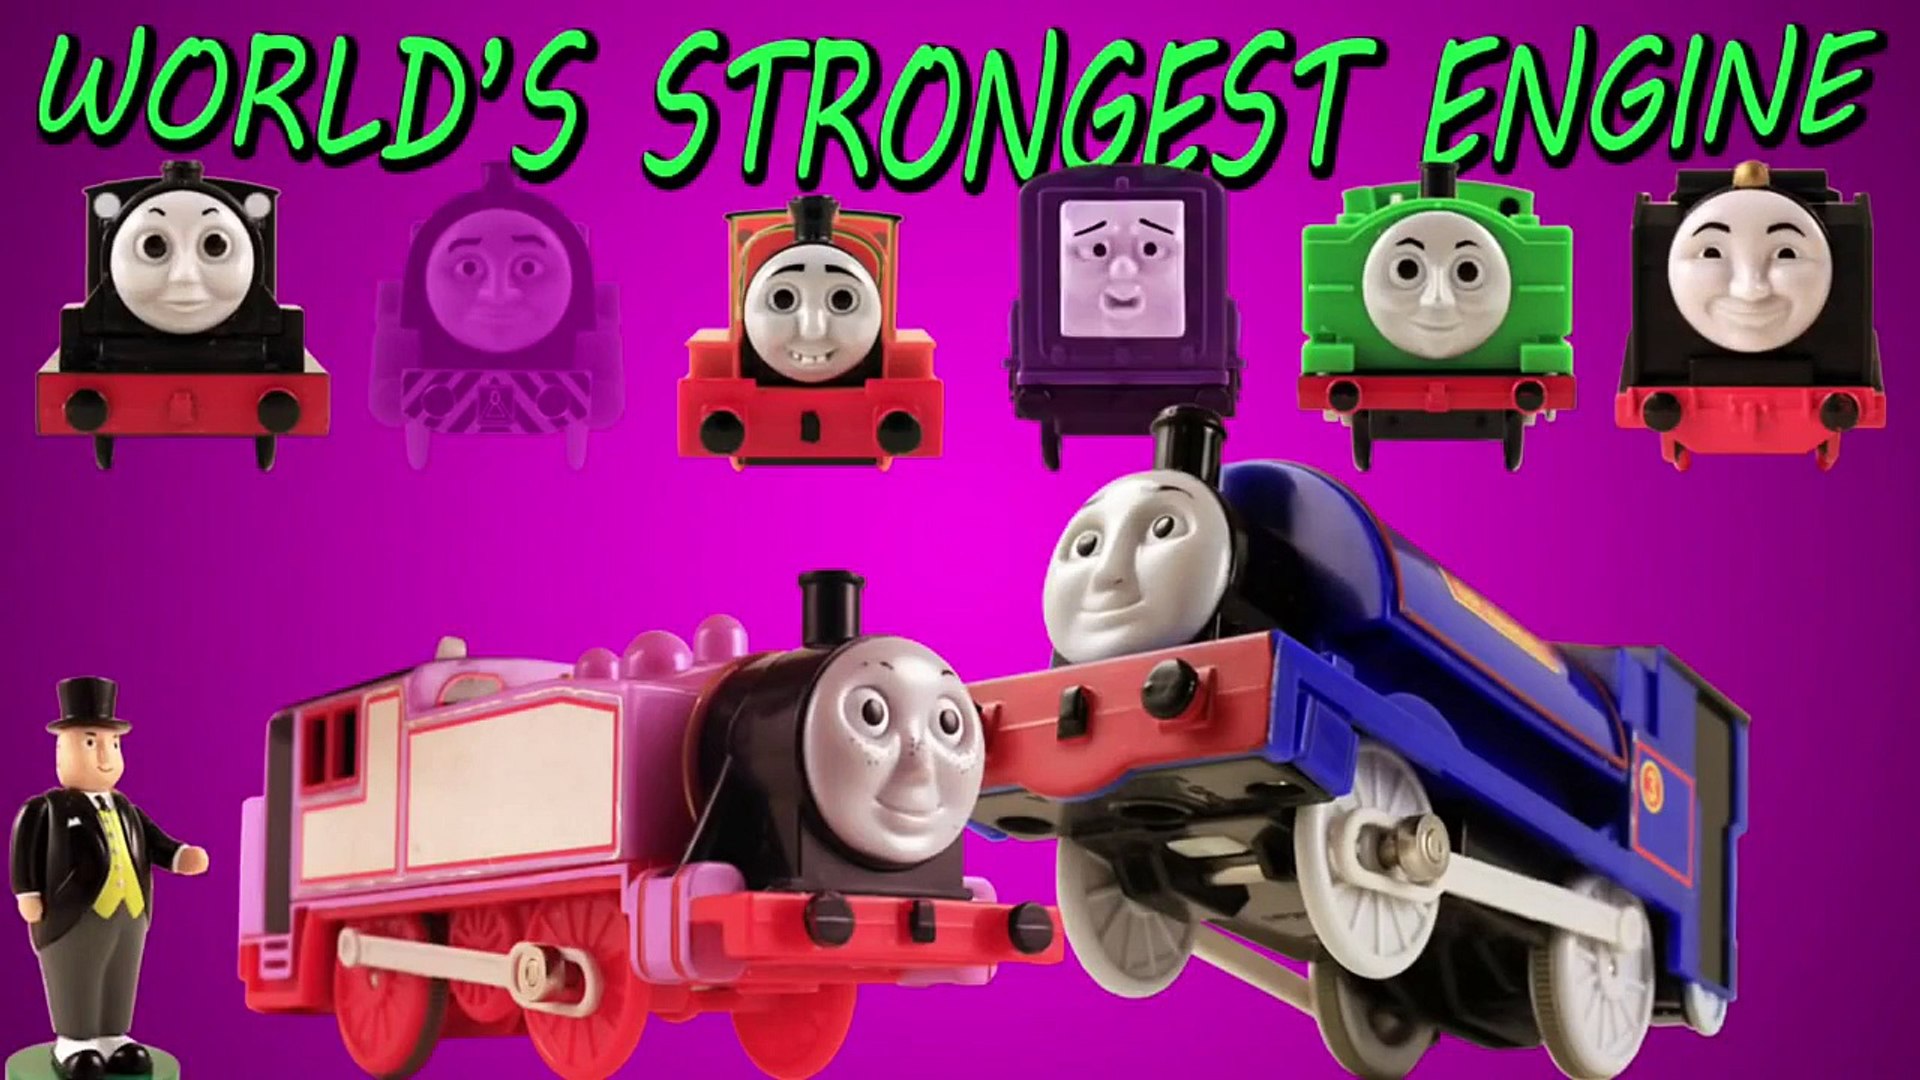 Thomas and friends world strongest engine